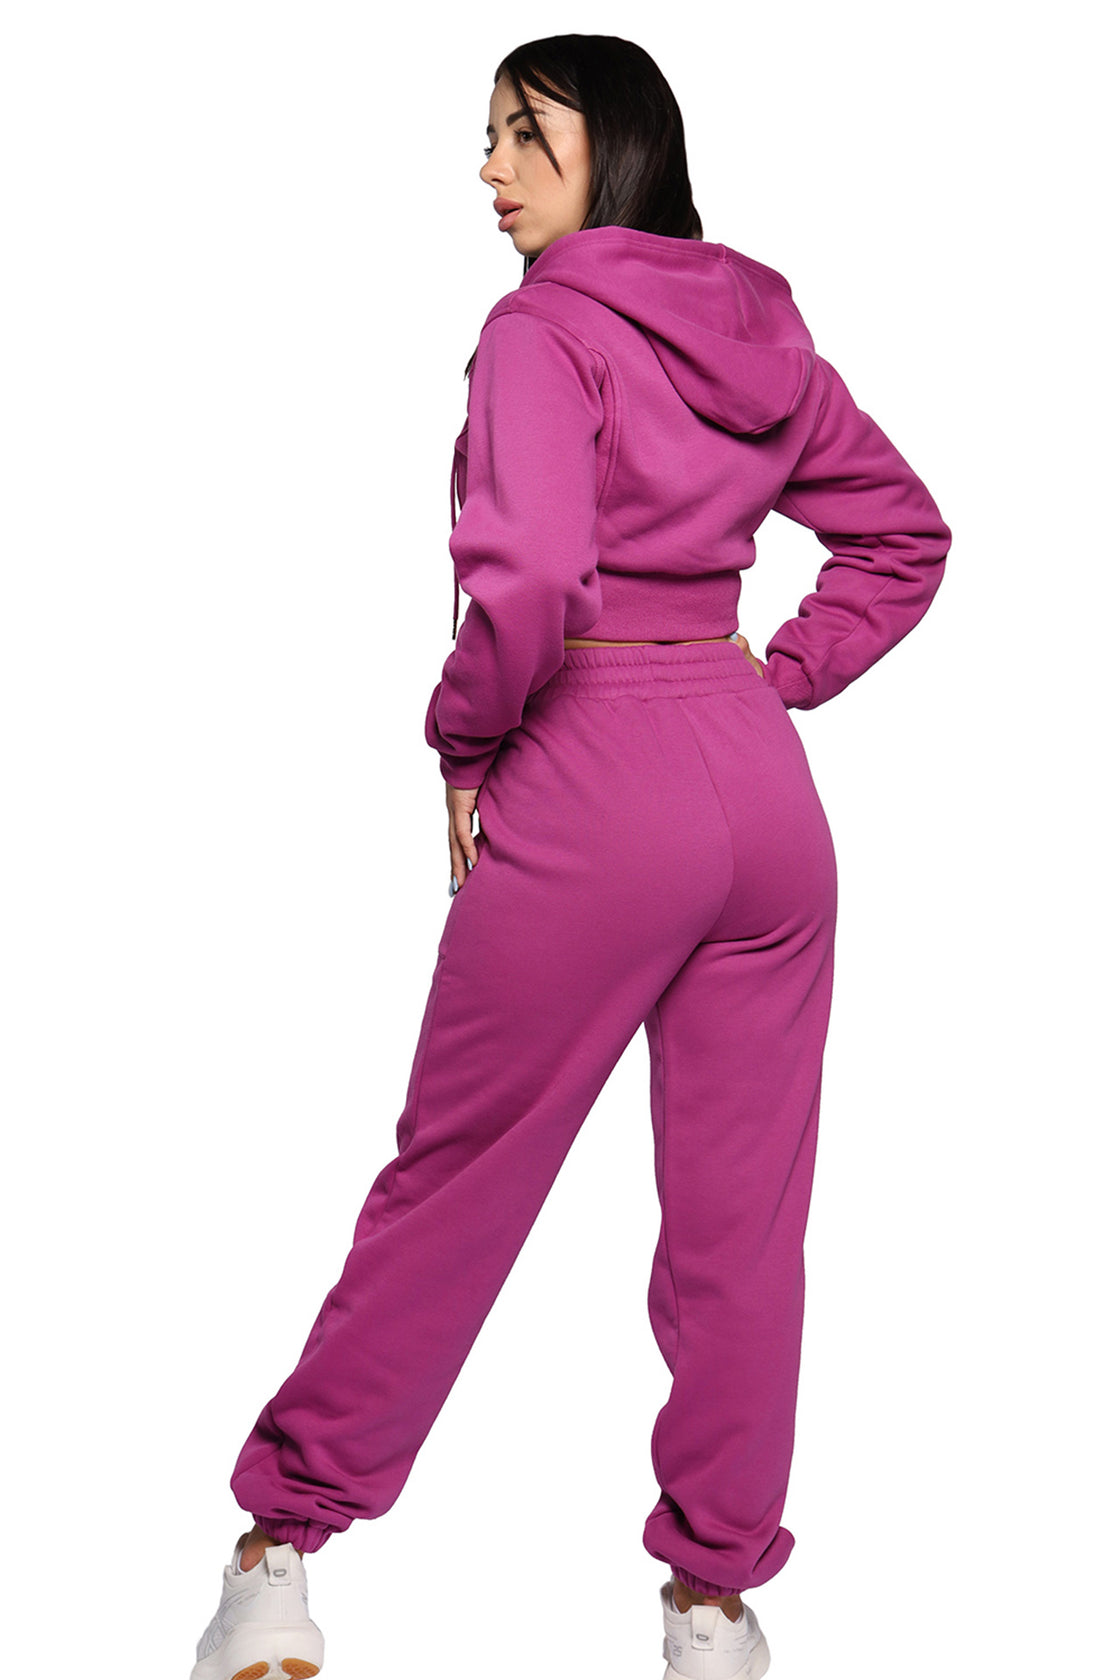 hoodie and joggers in hot pink